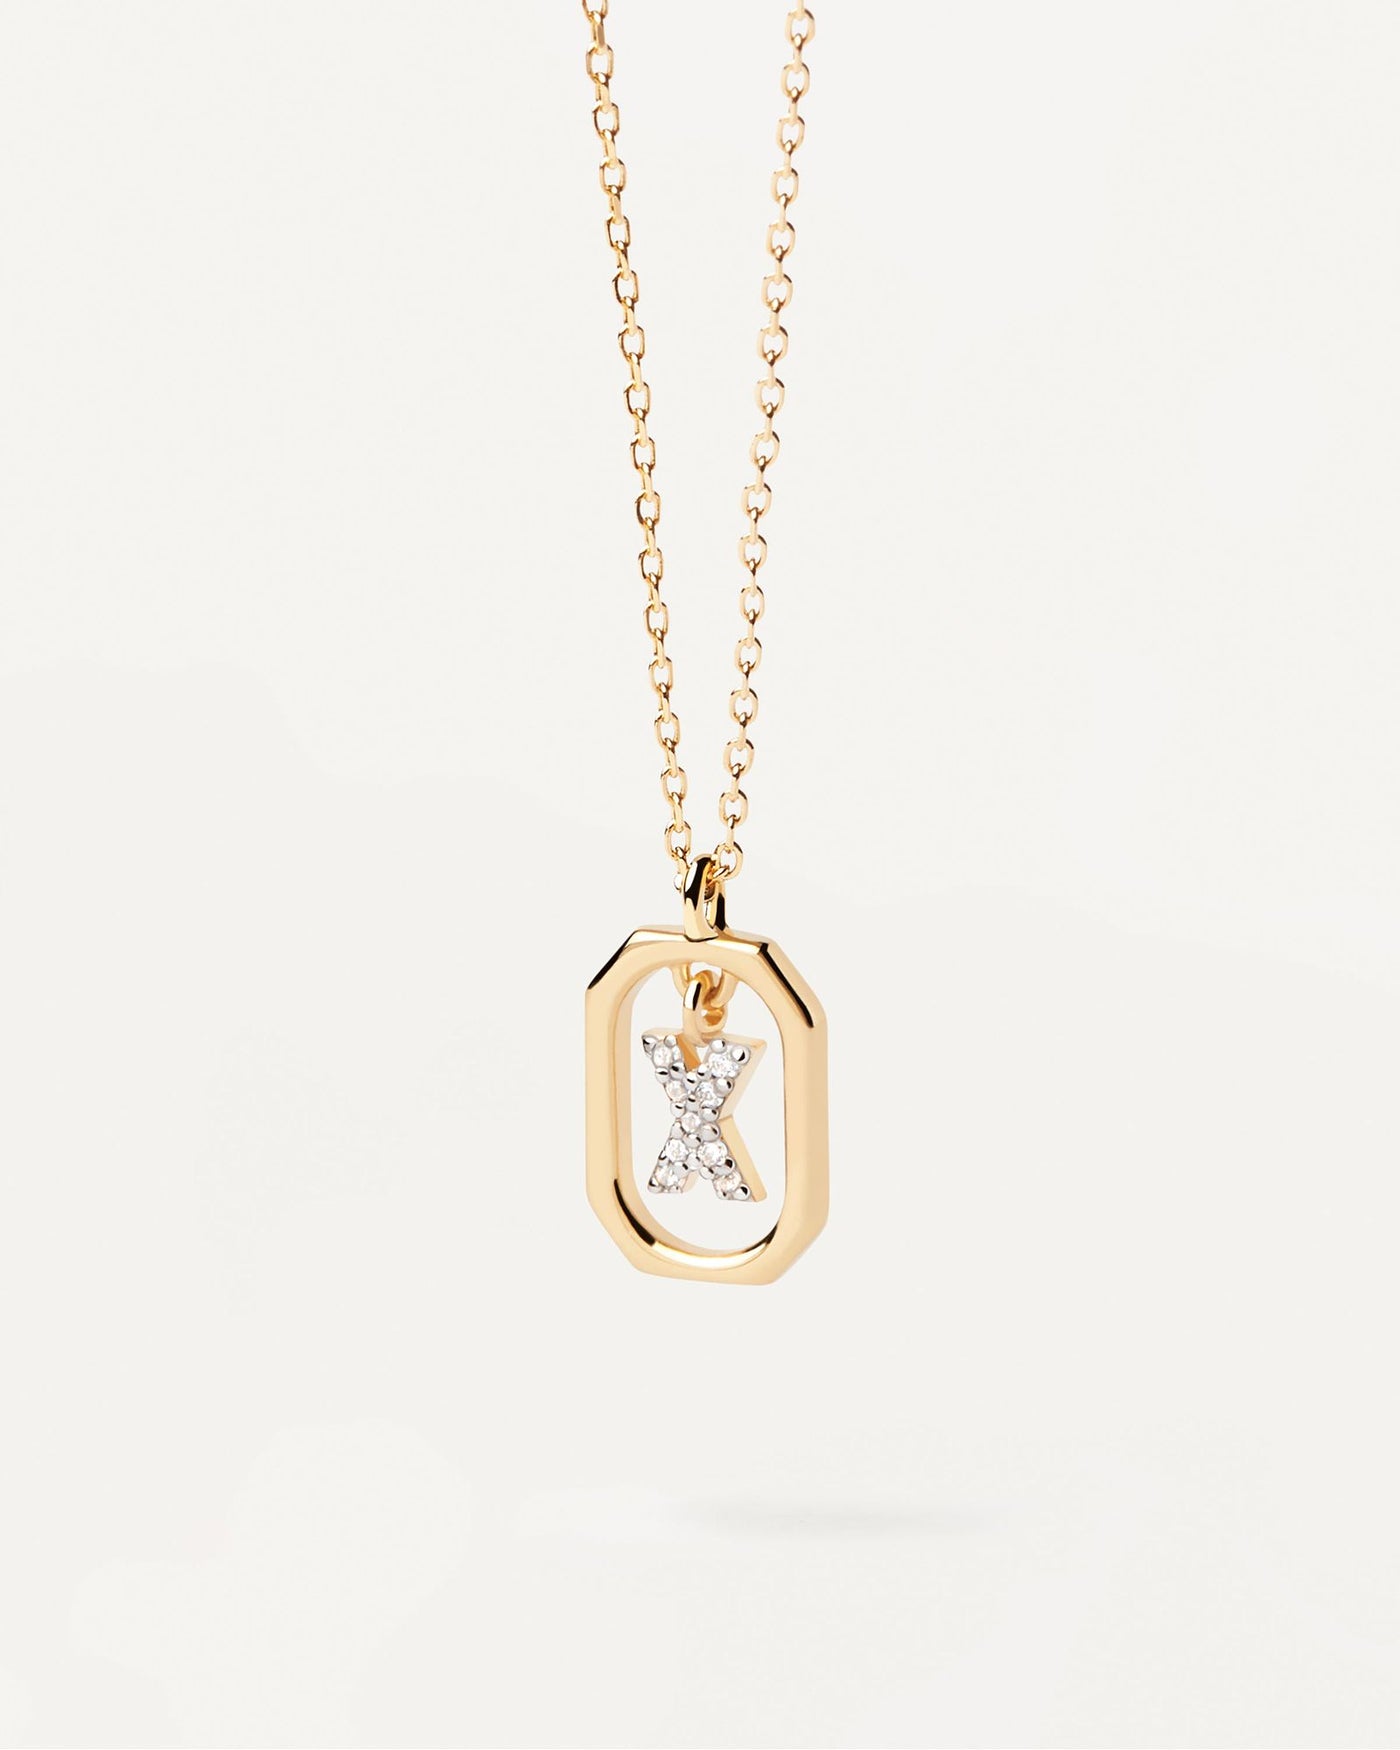 2024 Selection | Mini Letter X Necklace. Small initial X necklace in zirconia inside gold-plated silver octagonal pendant. Get the latest arrival from PDPAOLA. Place your order safely and get this Best Seller. Free Shipping.